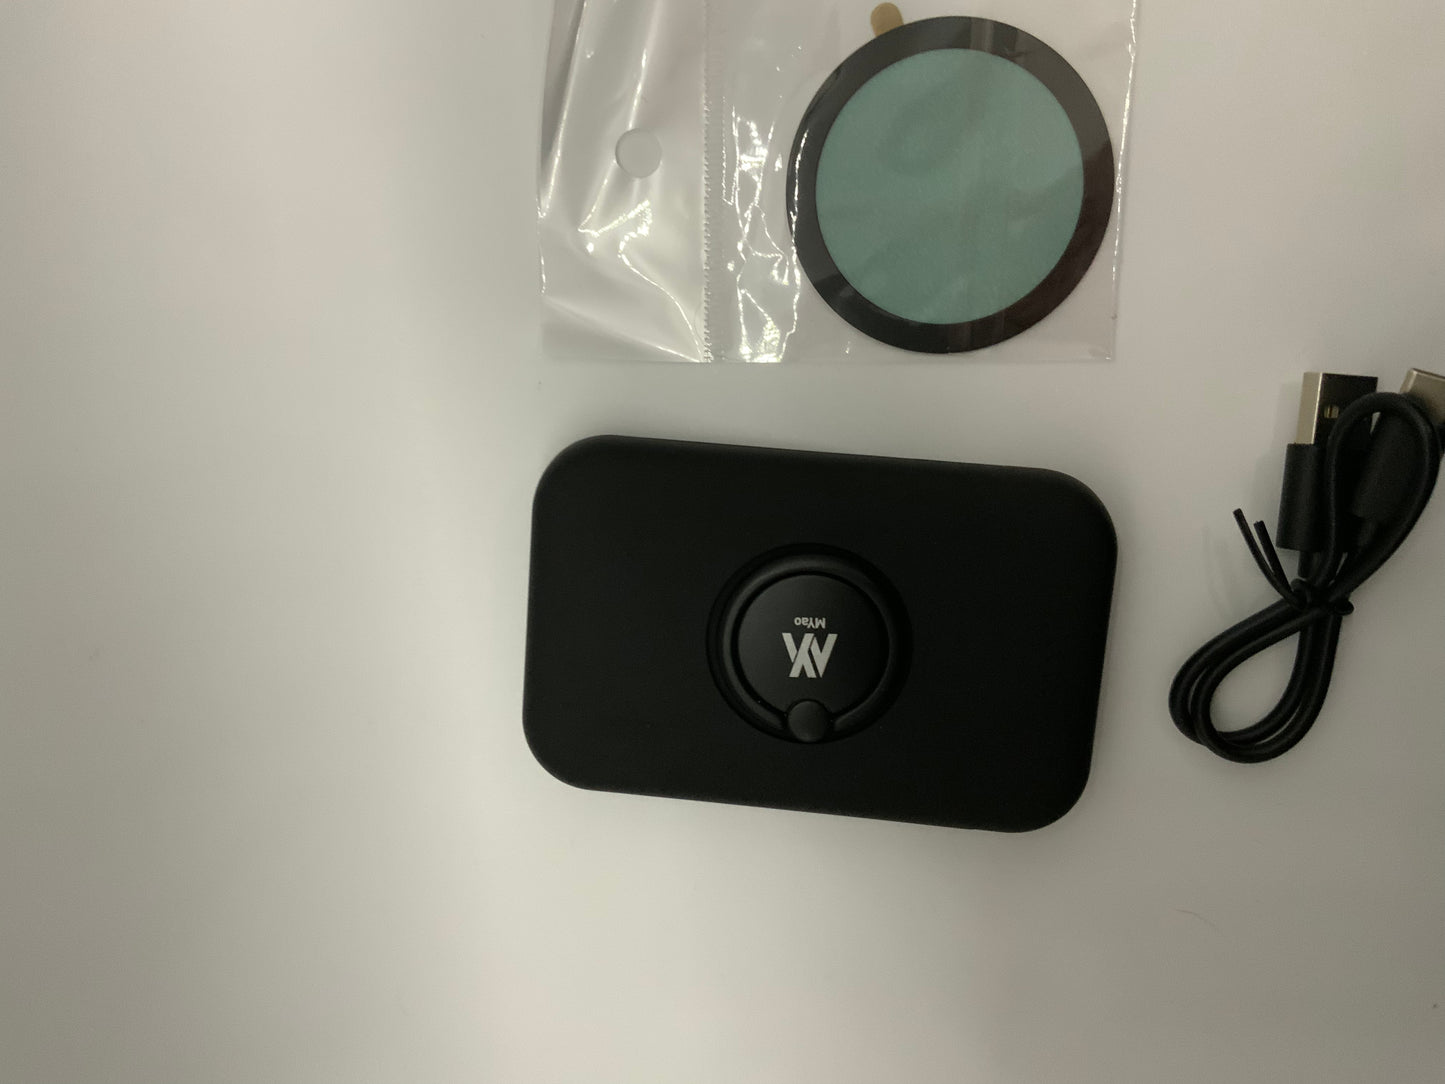 The picture shows three items on a white surface:1. On the left, there is a small circular object in a clear plastic bag. The object appears to be a filter or a lens, with a greenish tint.2. In the center, there is a black rectangular device with rounded corners. It has a circular depression in the middle with the letters "XV" and the word "WARP" written below it in white.3. On the right, there is a black cable with USB connectors. The cable is coiled and appears to be new.The items are ne